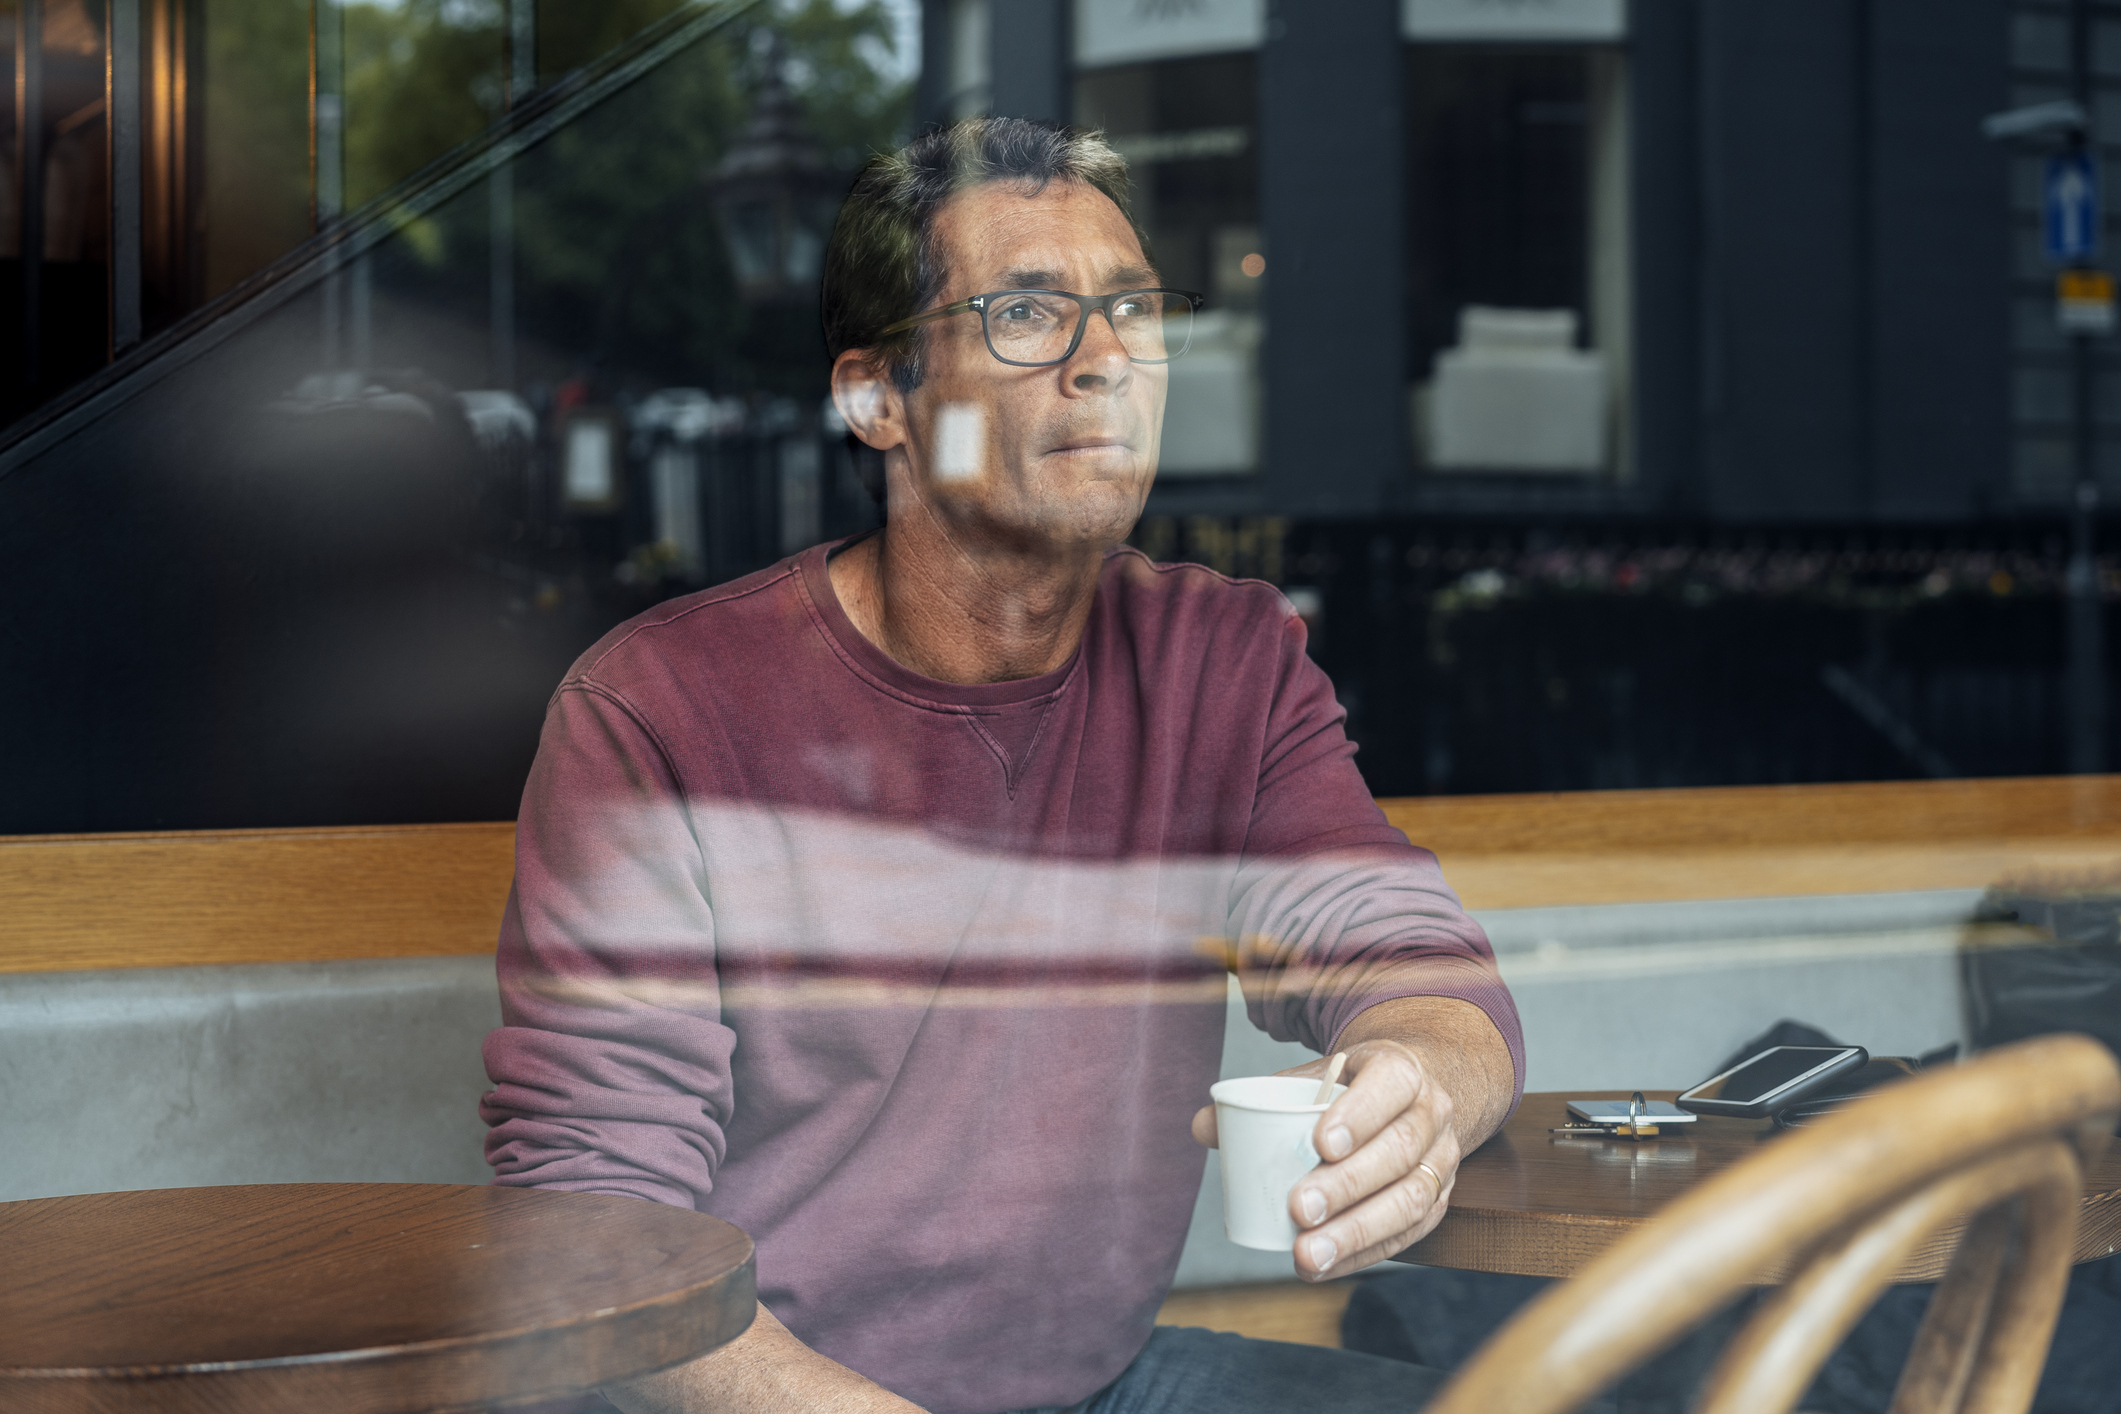 Man wearing glasses and a sweatshirt sitting in a cafe, holding a cup of coffee and looking out the window